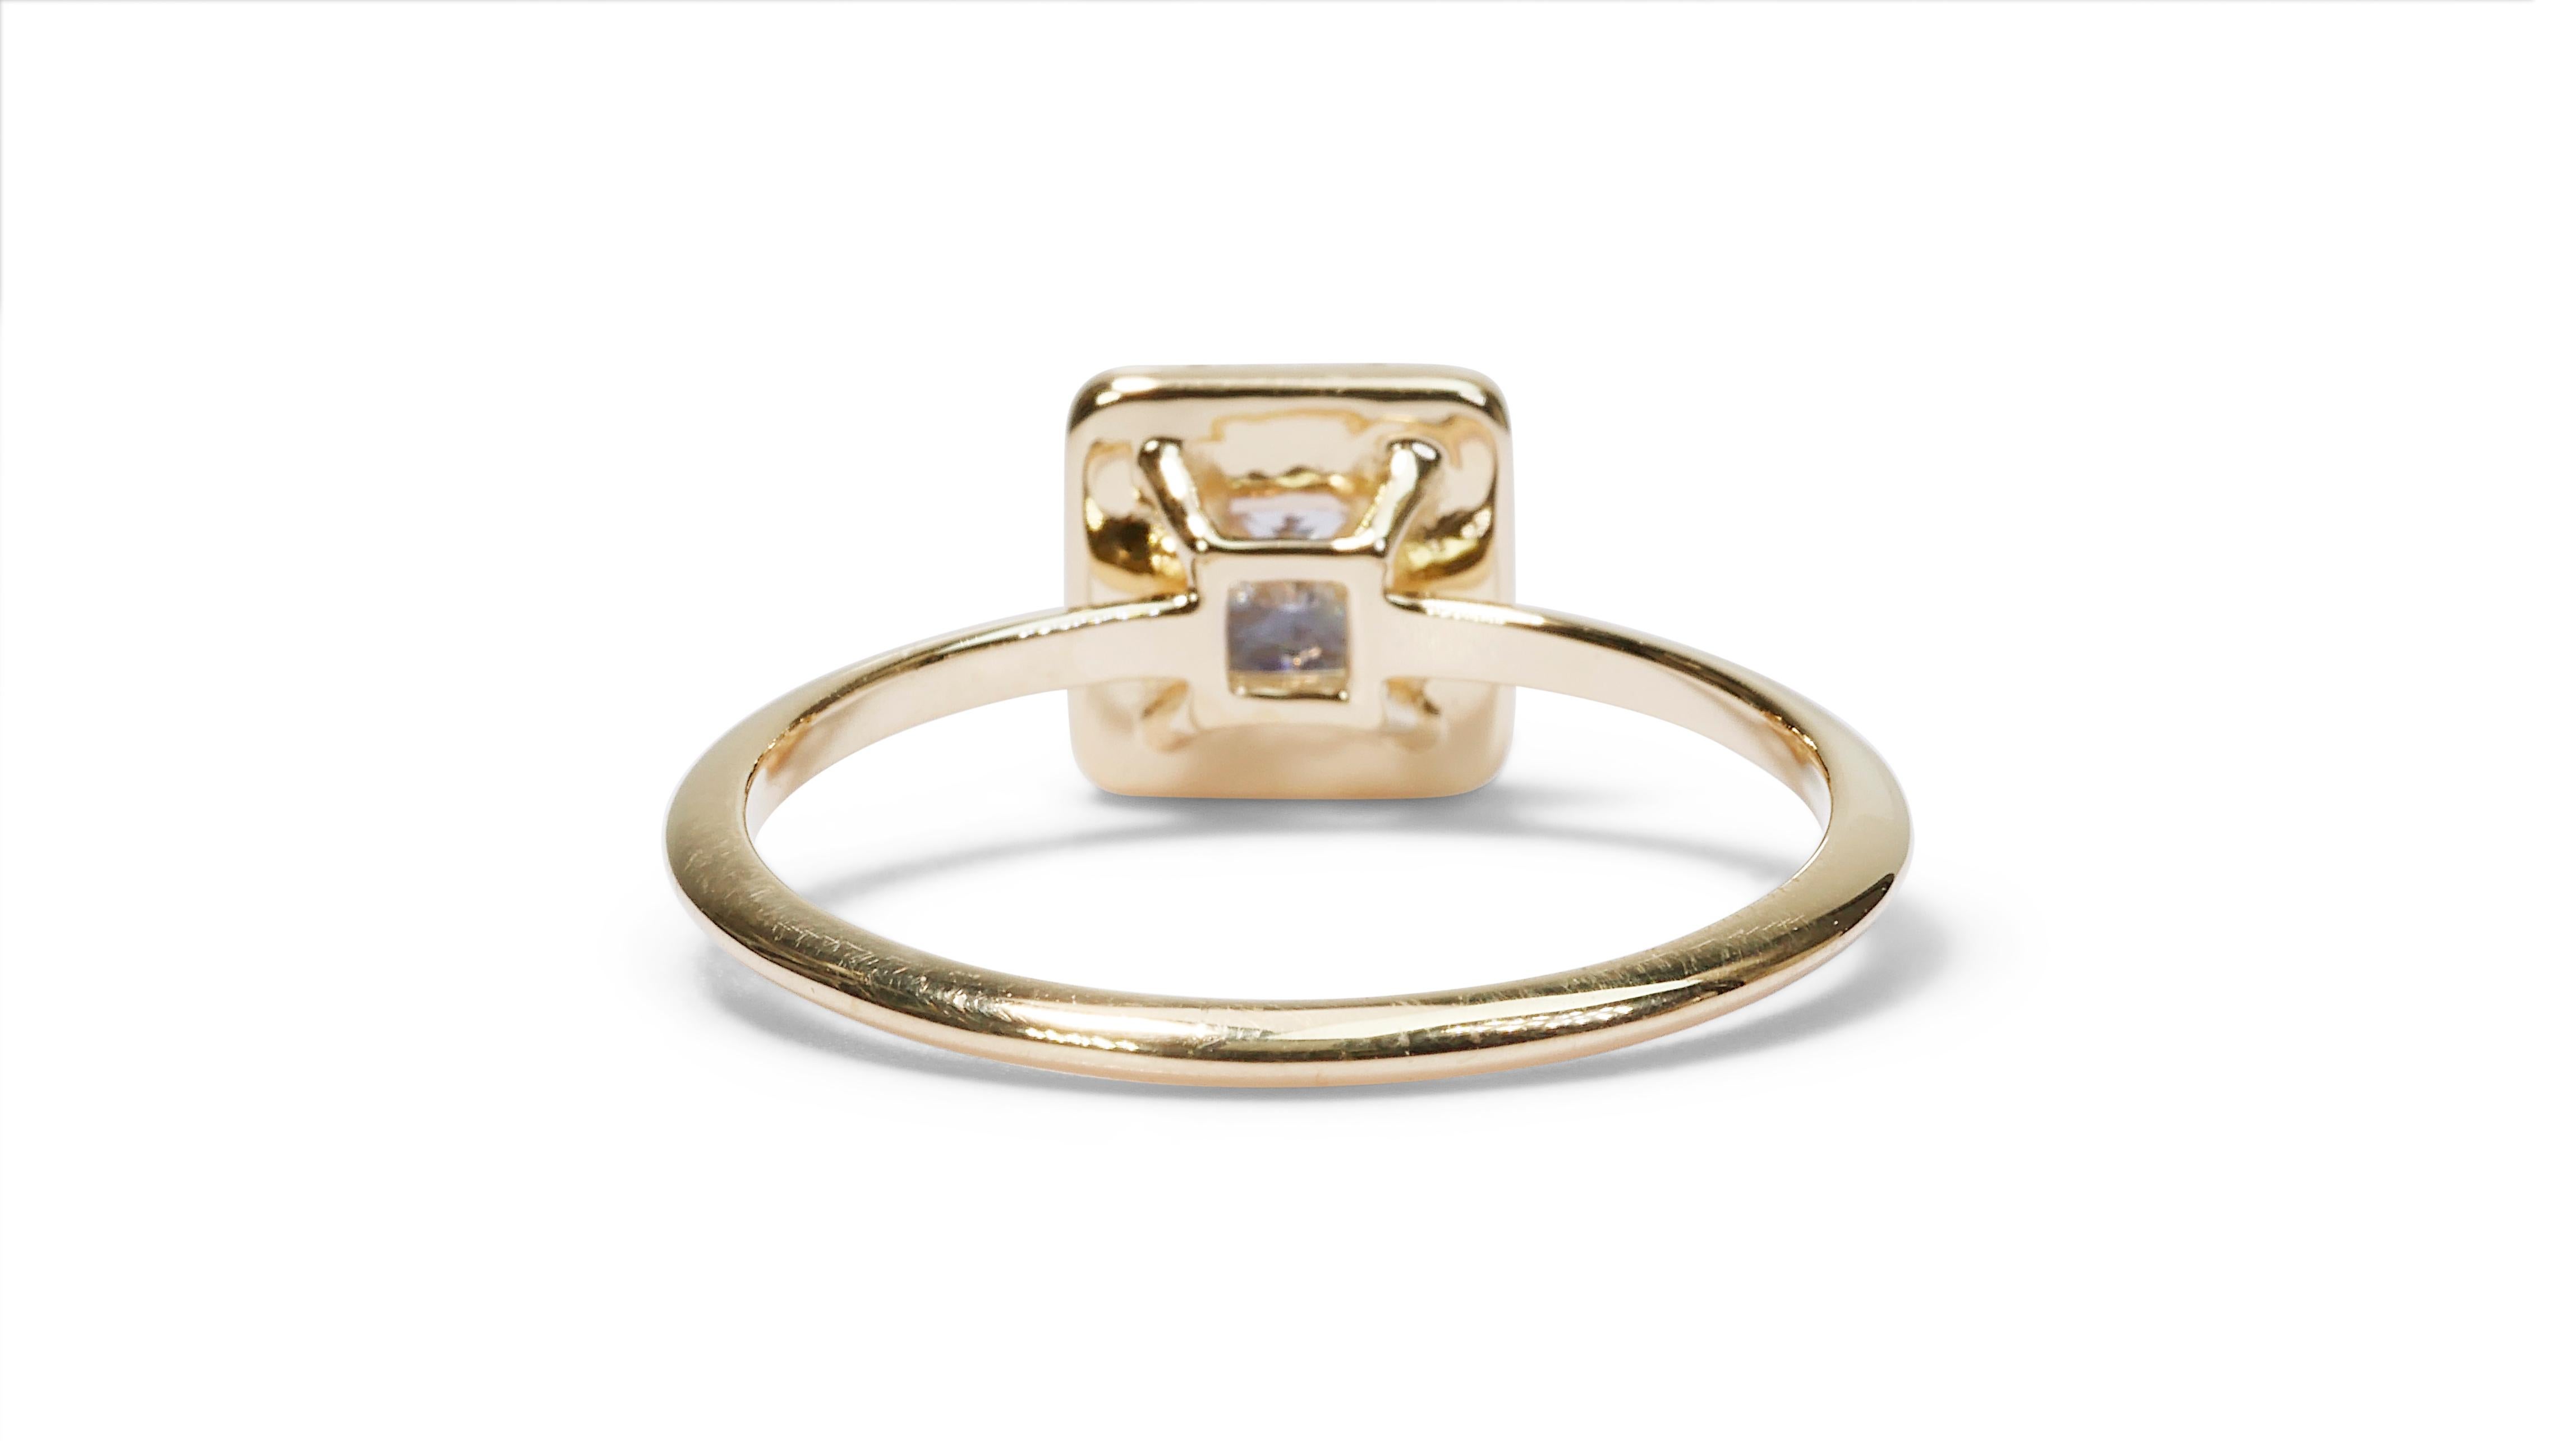 Charming 0.90ct Square-Cut Diamond Halo Ring in 18k Yellow Gold - GIA Certified For Sale 3